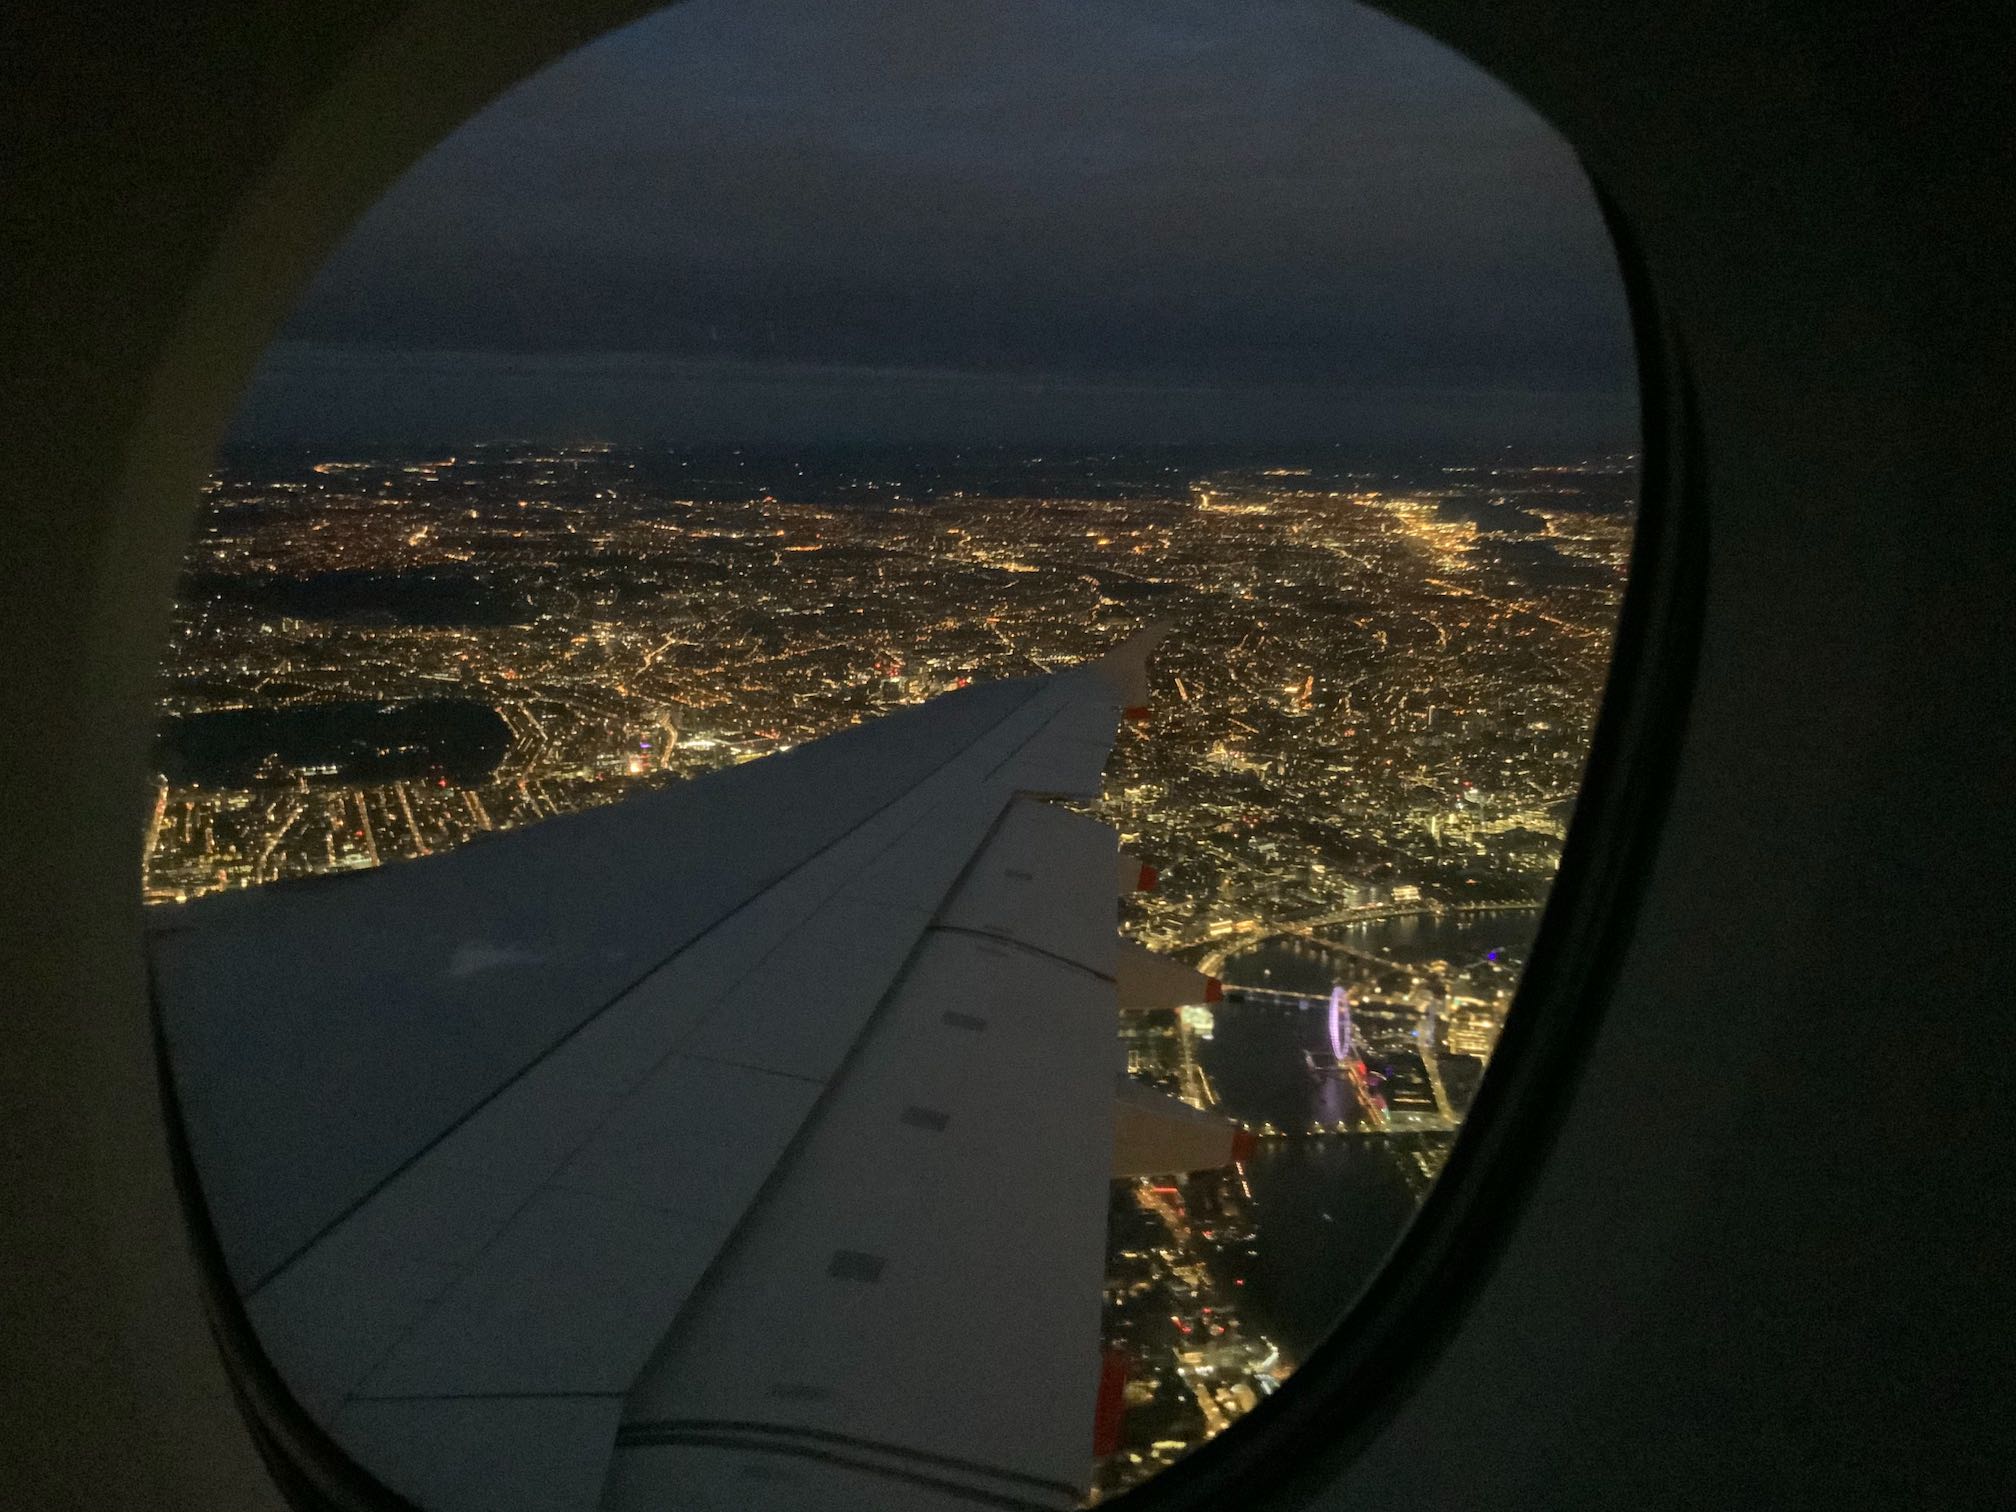 Photo of London at night from a plane window.